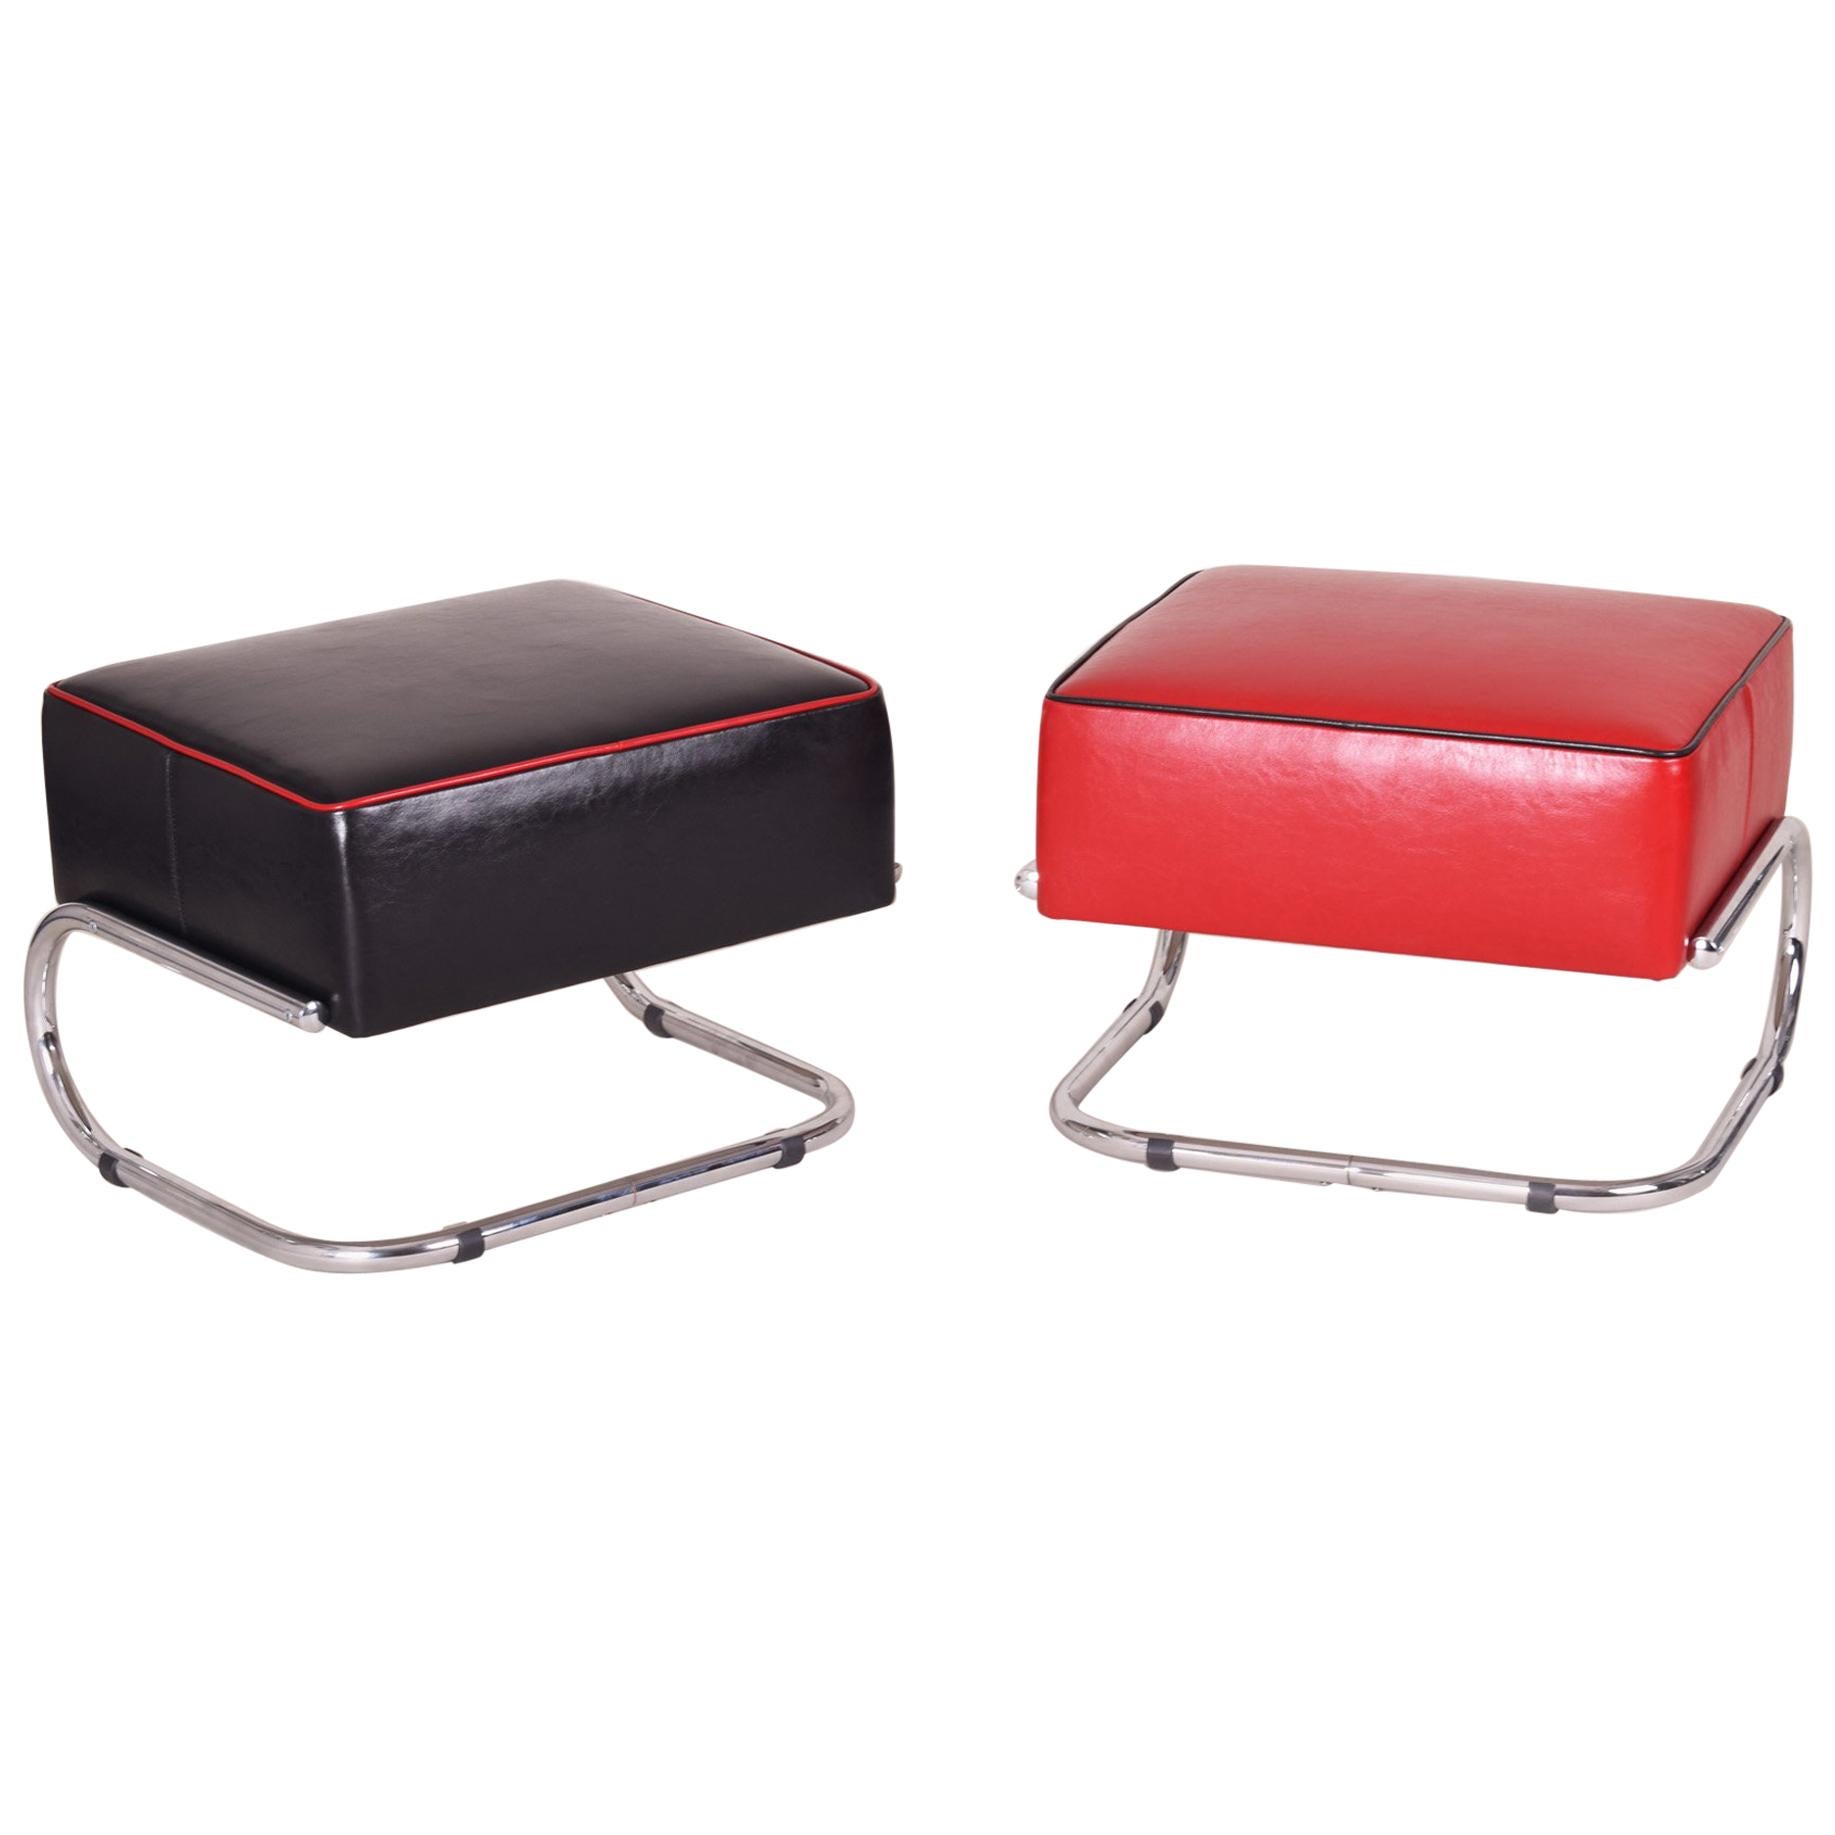 Pair of Modernist Tubular Steel Stools, Black and Red Leather, Chrome, 1930-1939